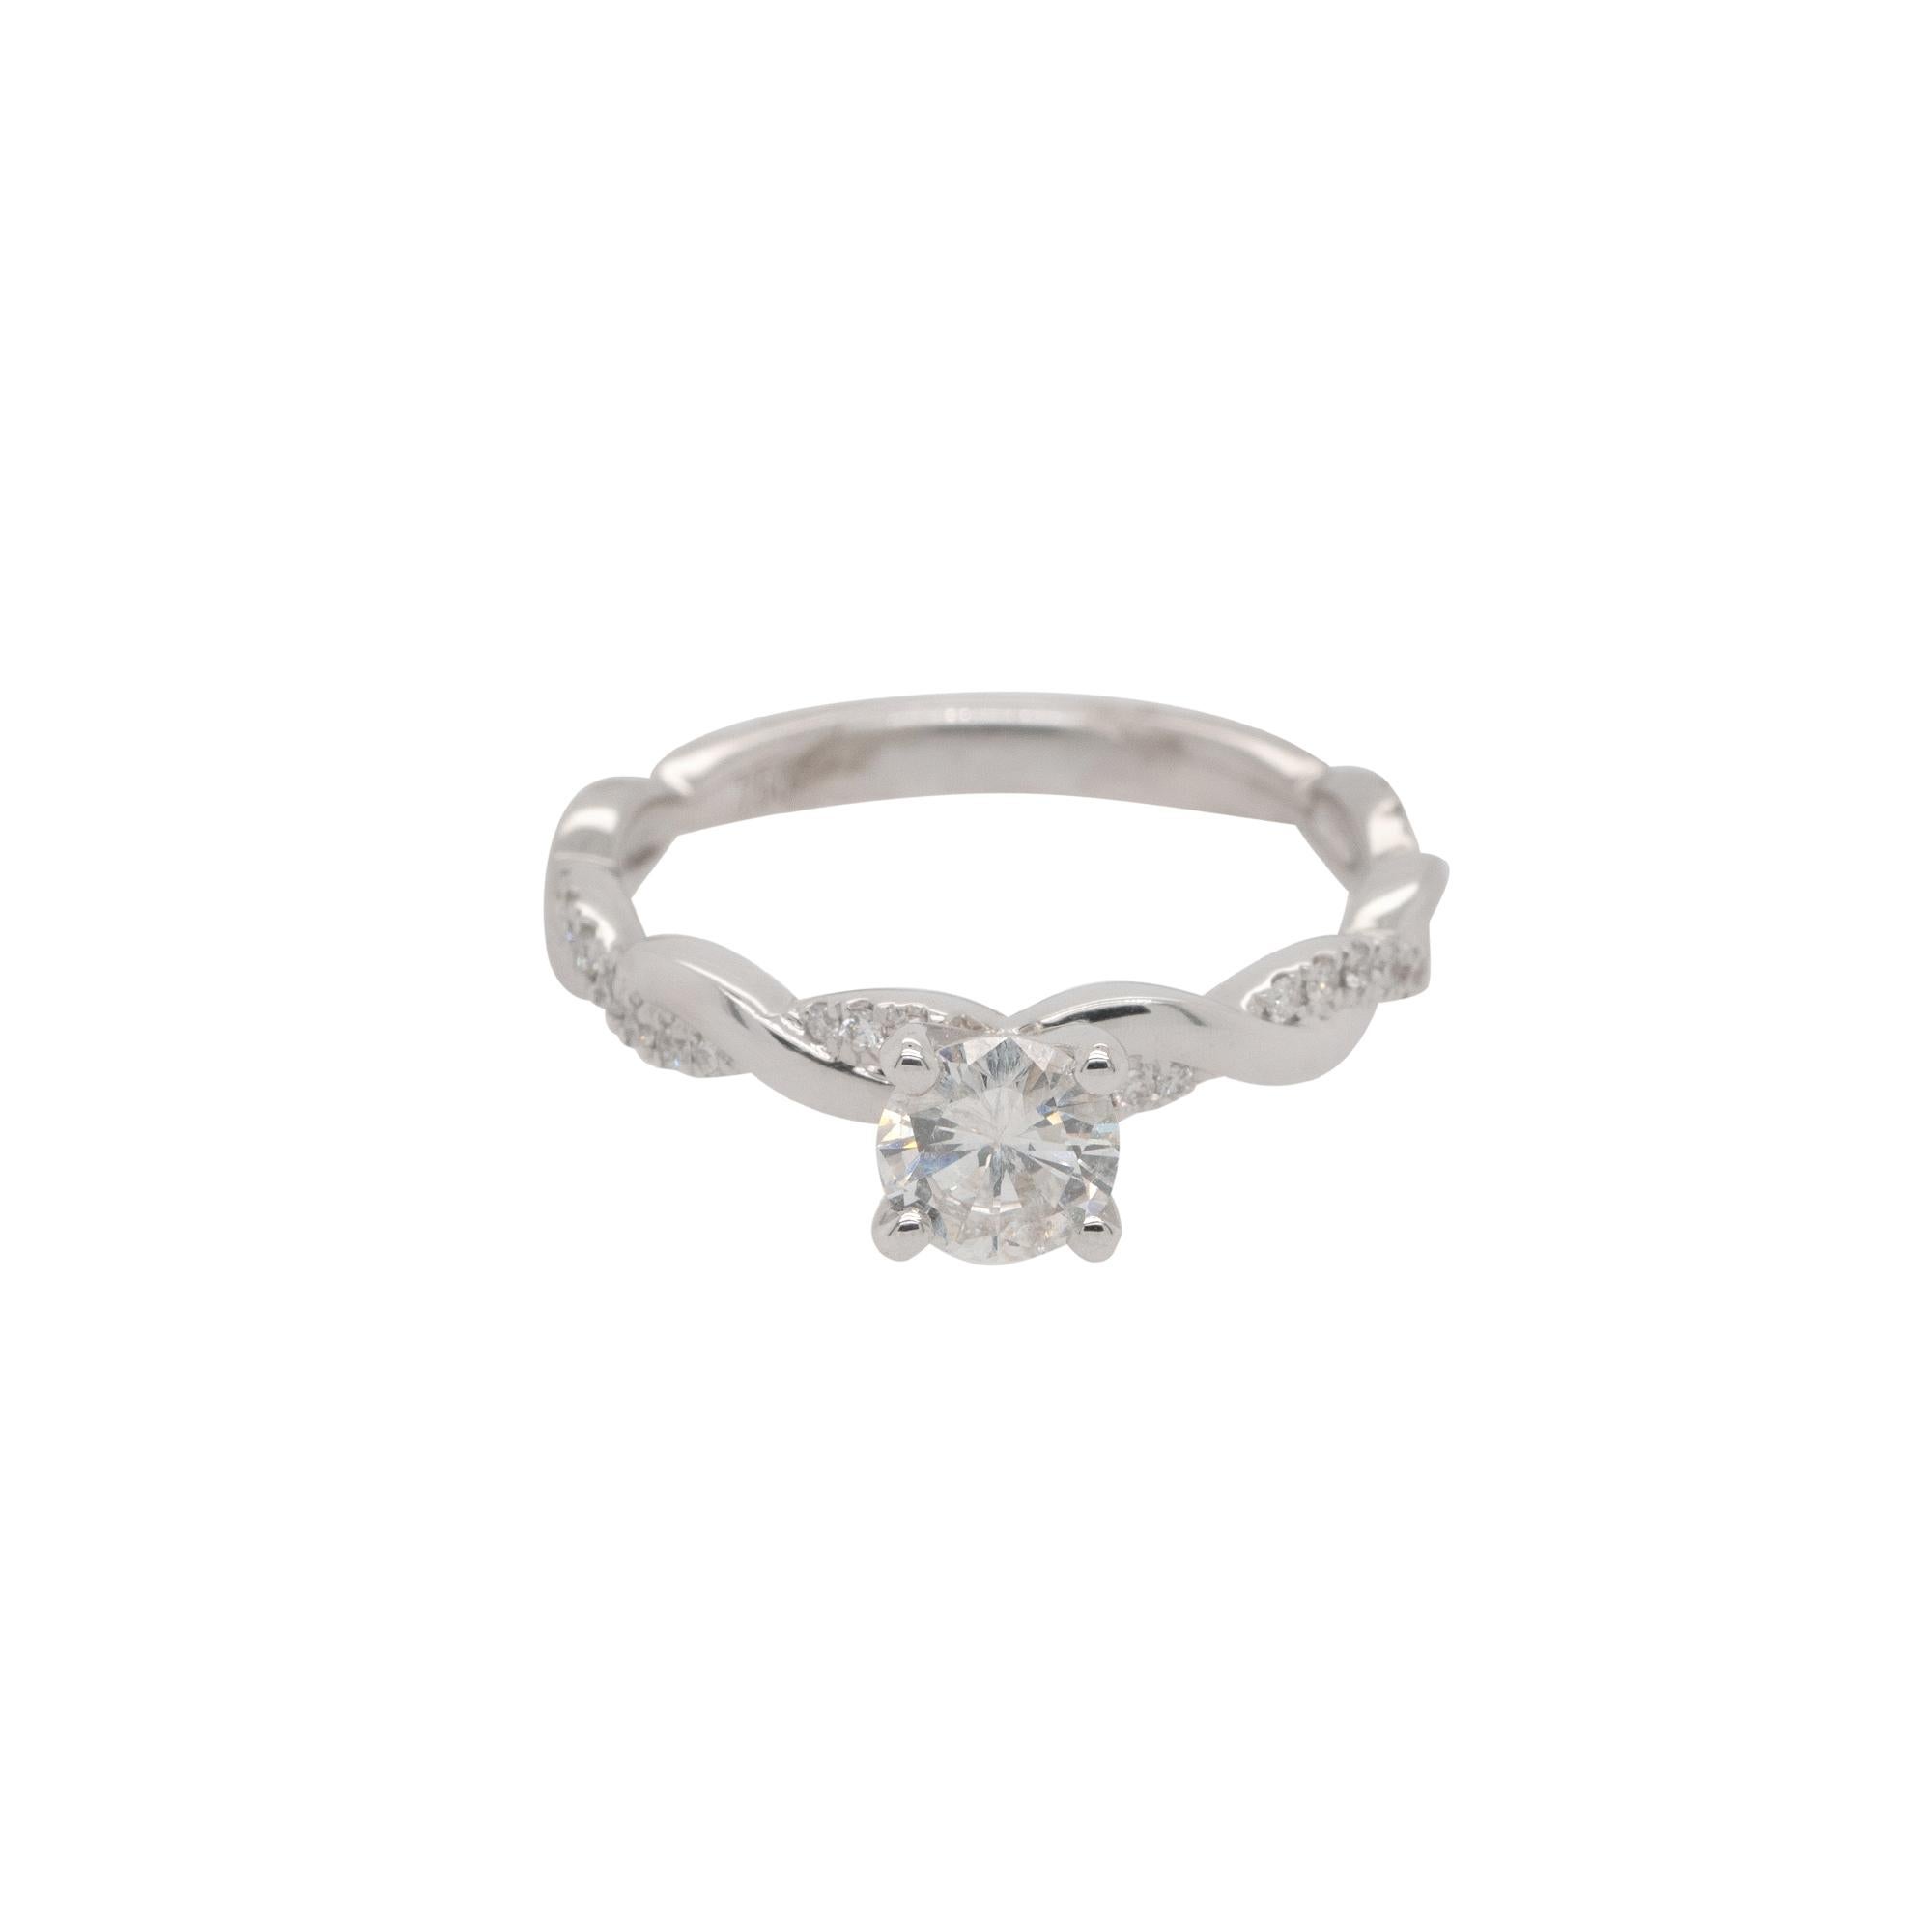 Center Details: 0.55ct Round Brilliant Natural Diamond that is H in color and SI2 in clarity
Ring Material: 18k white gold
Ring Details: Center Diamond is set in a white gold twisted mounting featuring approximately 0.16ctw of round cut Diamonds.